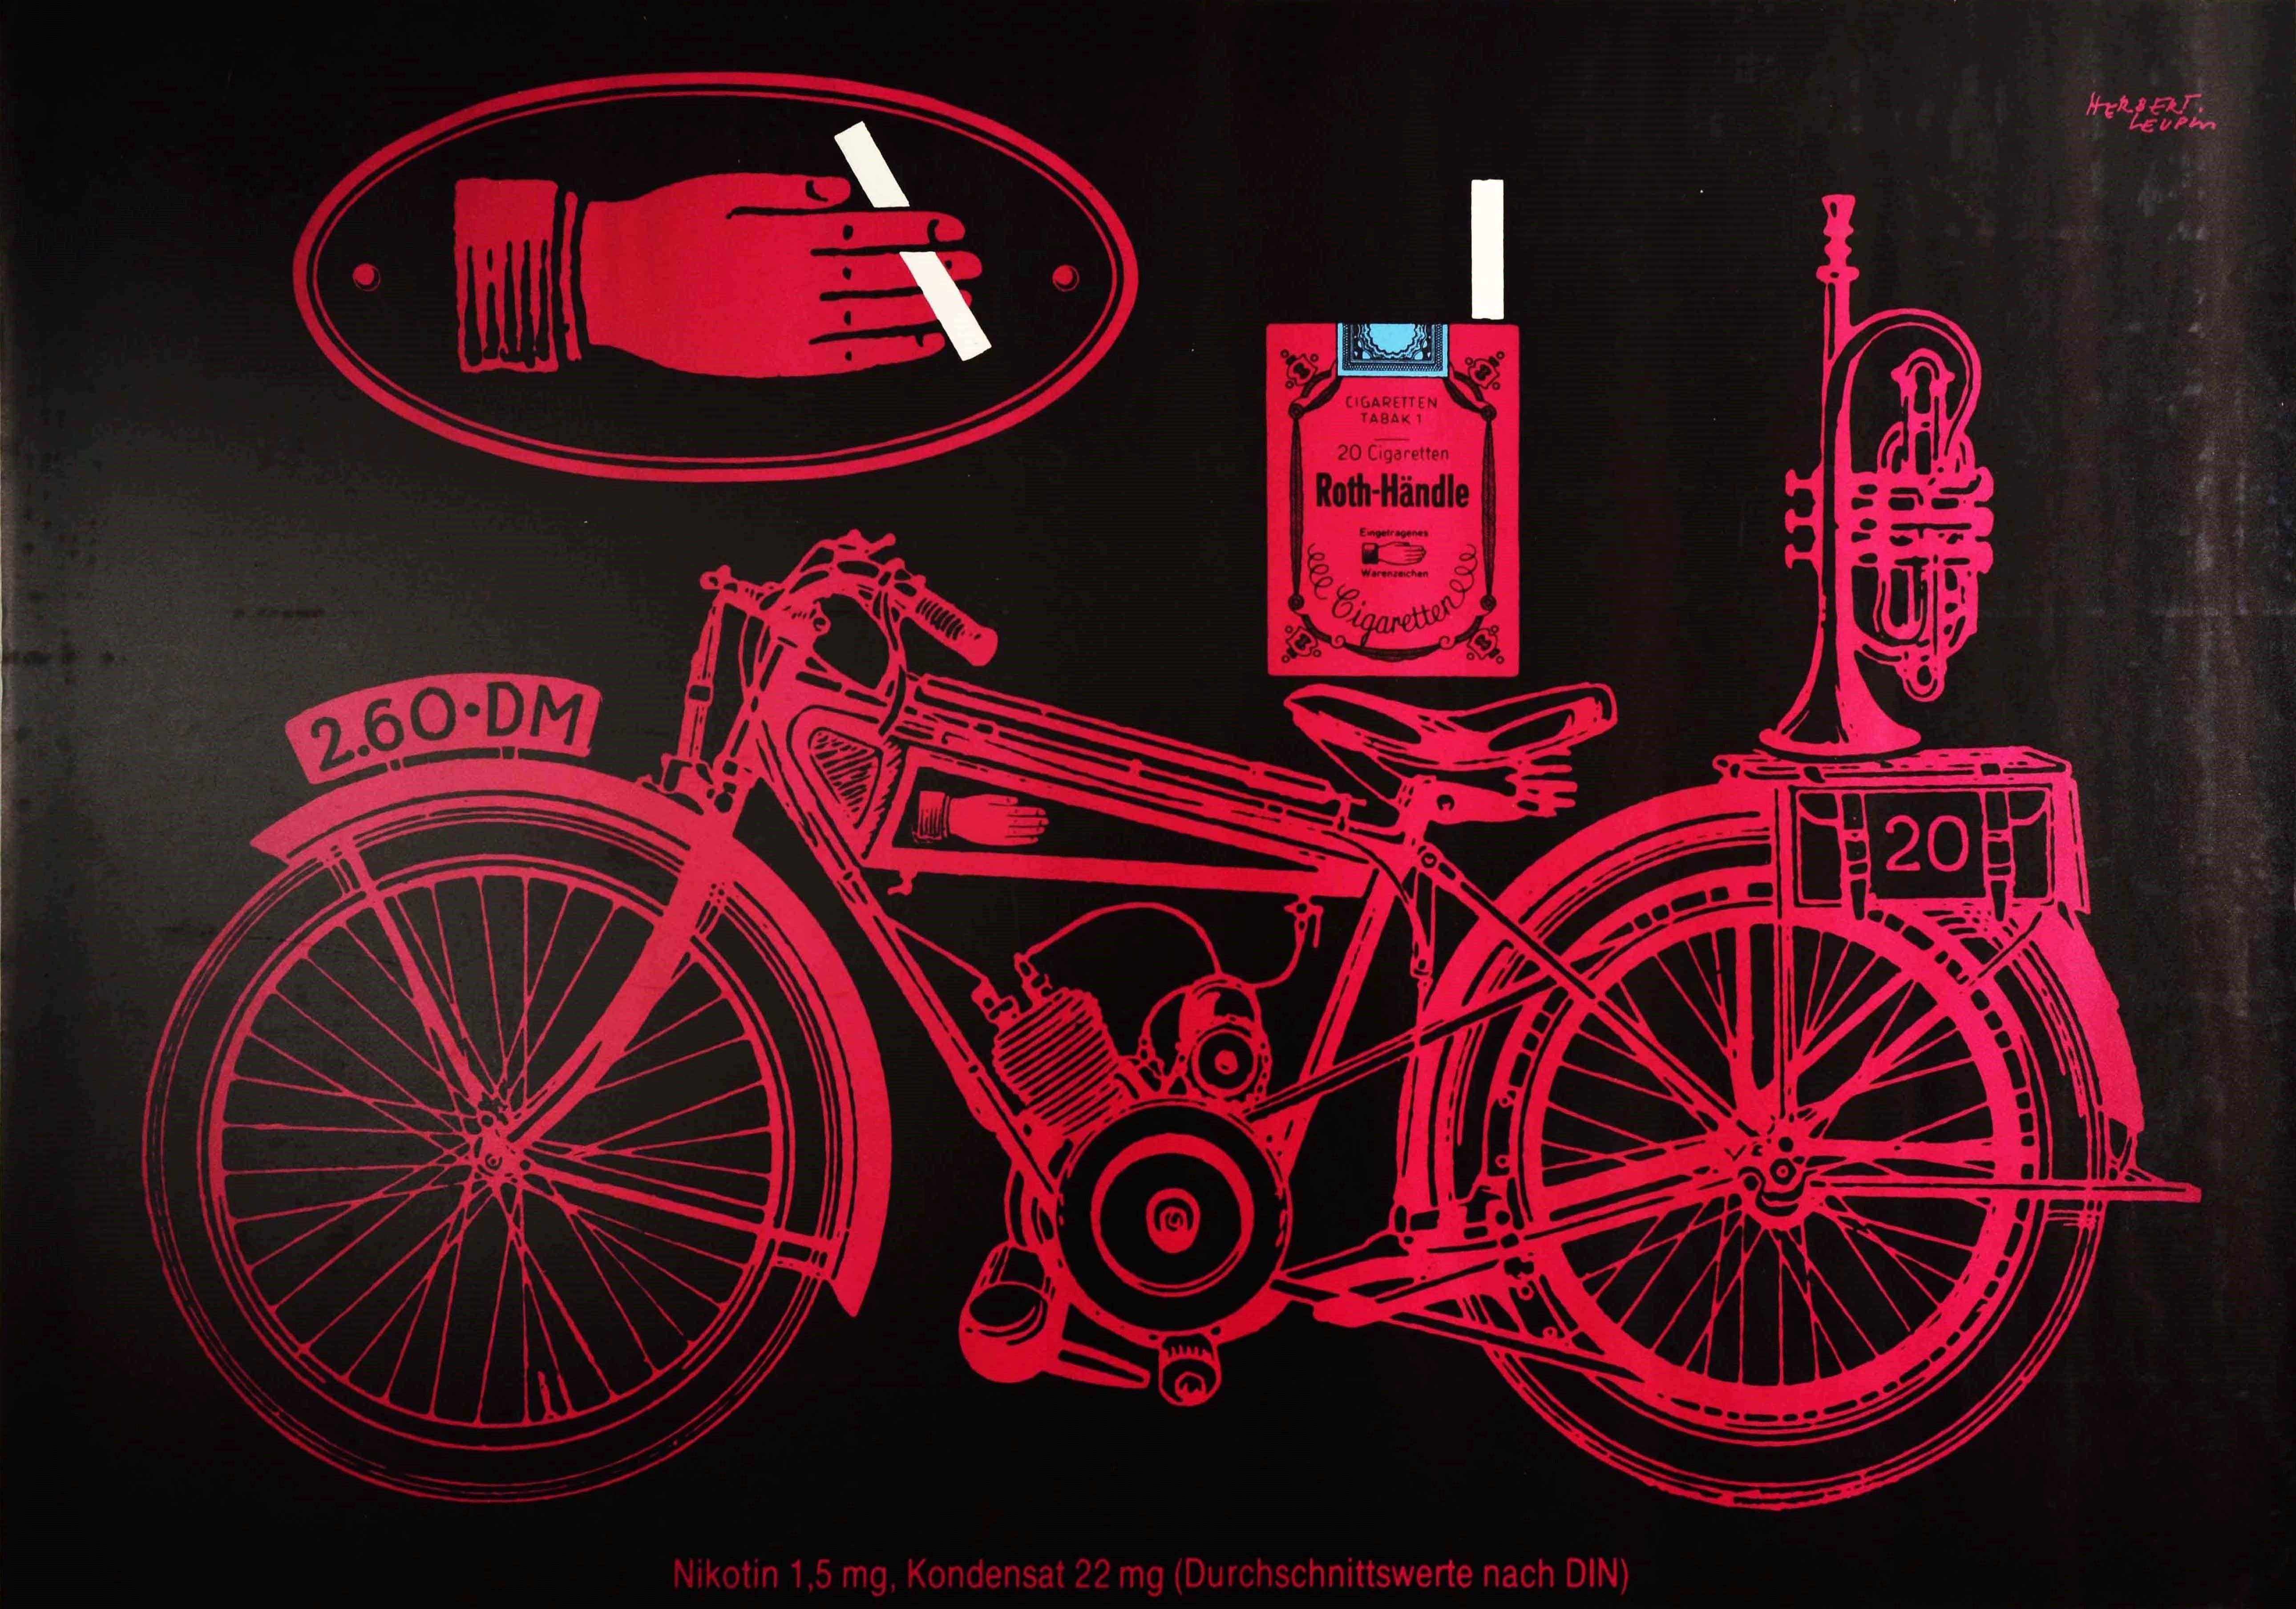 Original vintage advertising poster for Roth-Handle cigarettes featuring a red and black illustration of a pack of cigarettes on a motorcycle with a trumpet on the back, a hand holding a cigarette above the motorbike and text below the image -